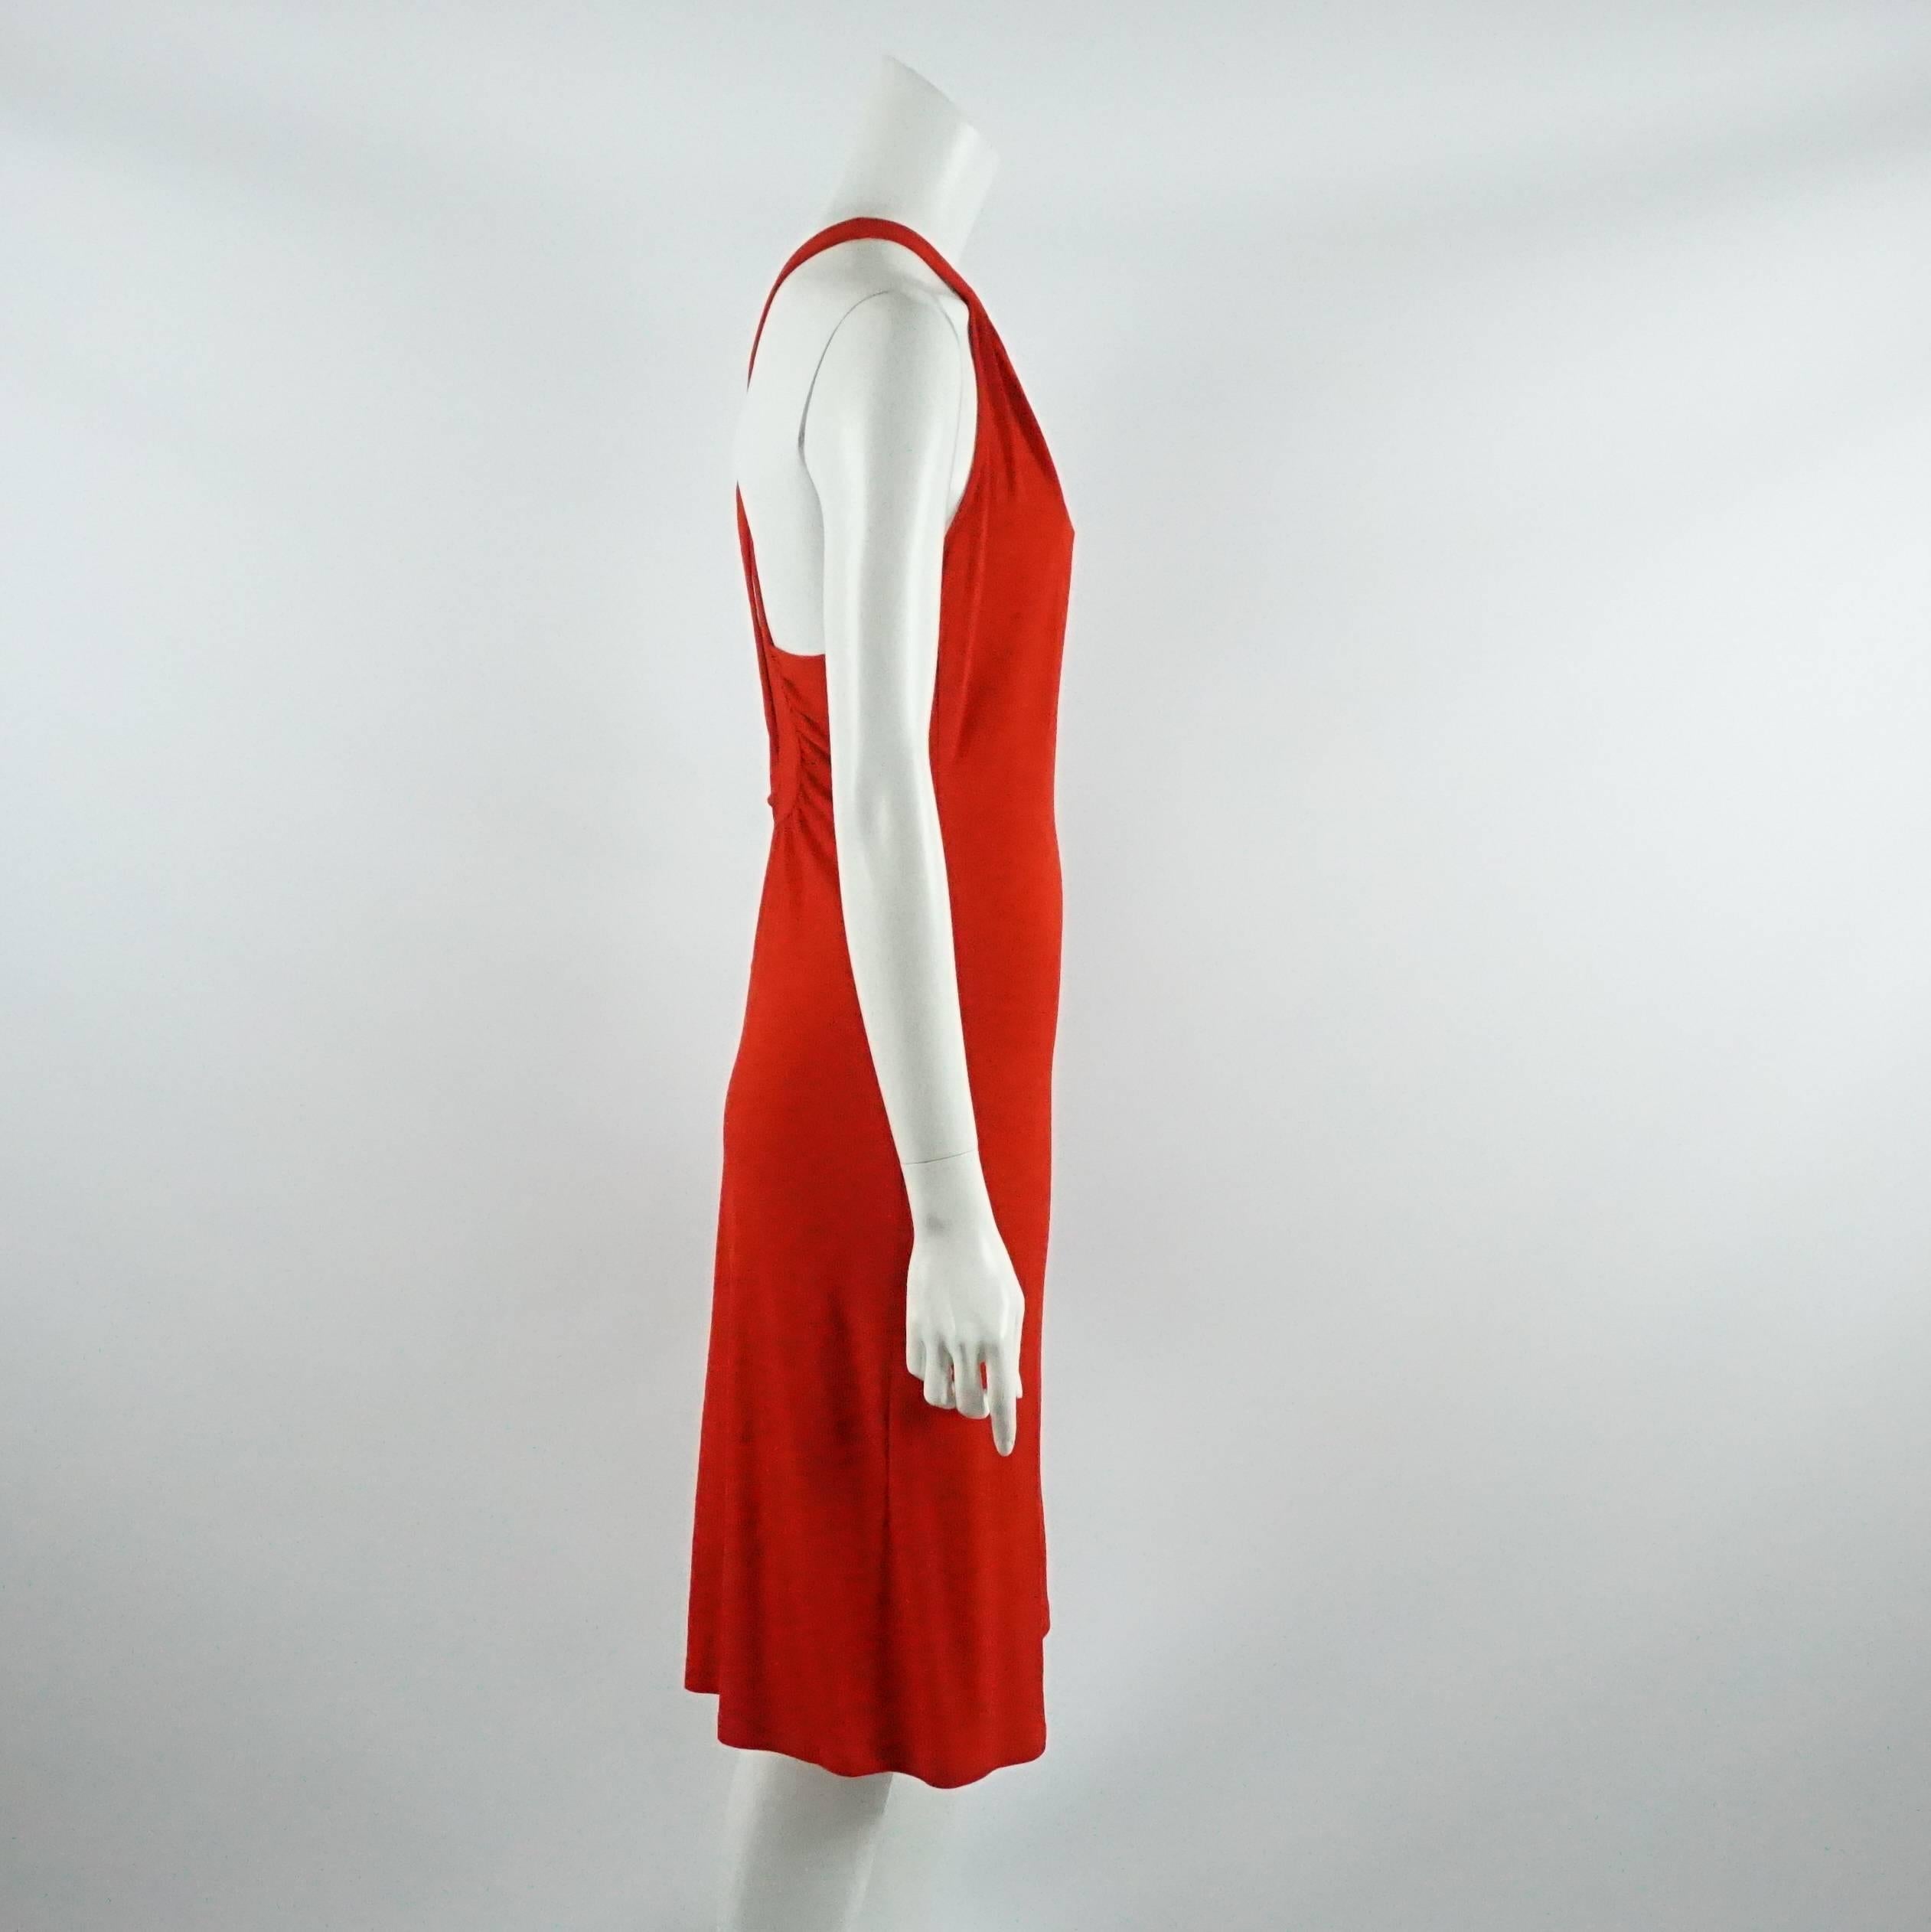 This Celine halter dress is a beautiful shade of red. The straps criss-cross in the back to form a keyhole cutout. This dress is in very good condition with a couple minor pulls.

Measurements
Bust: 36